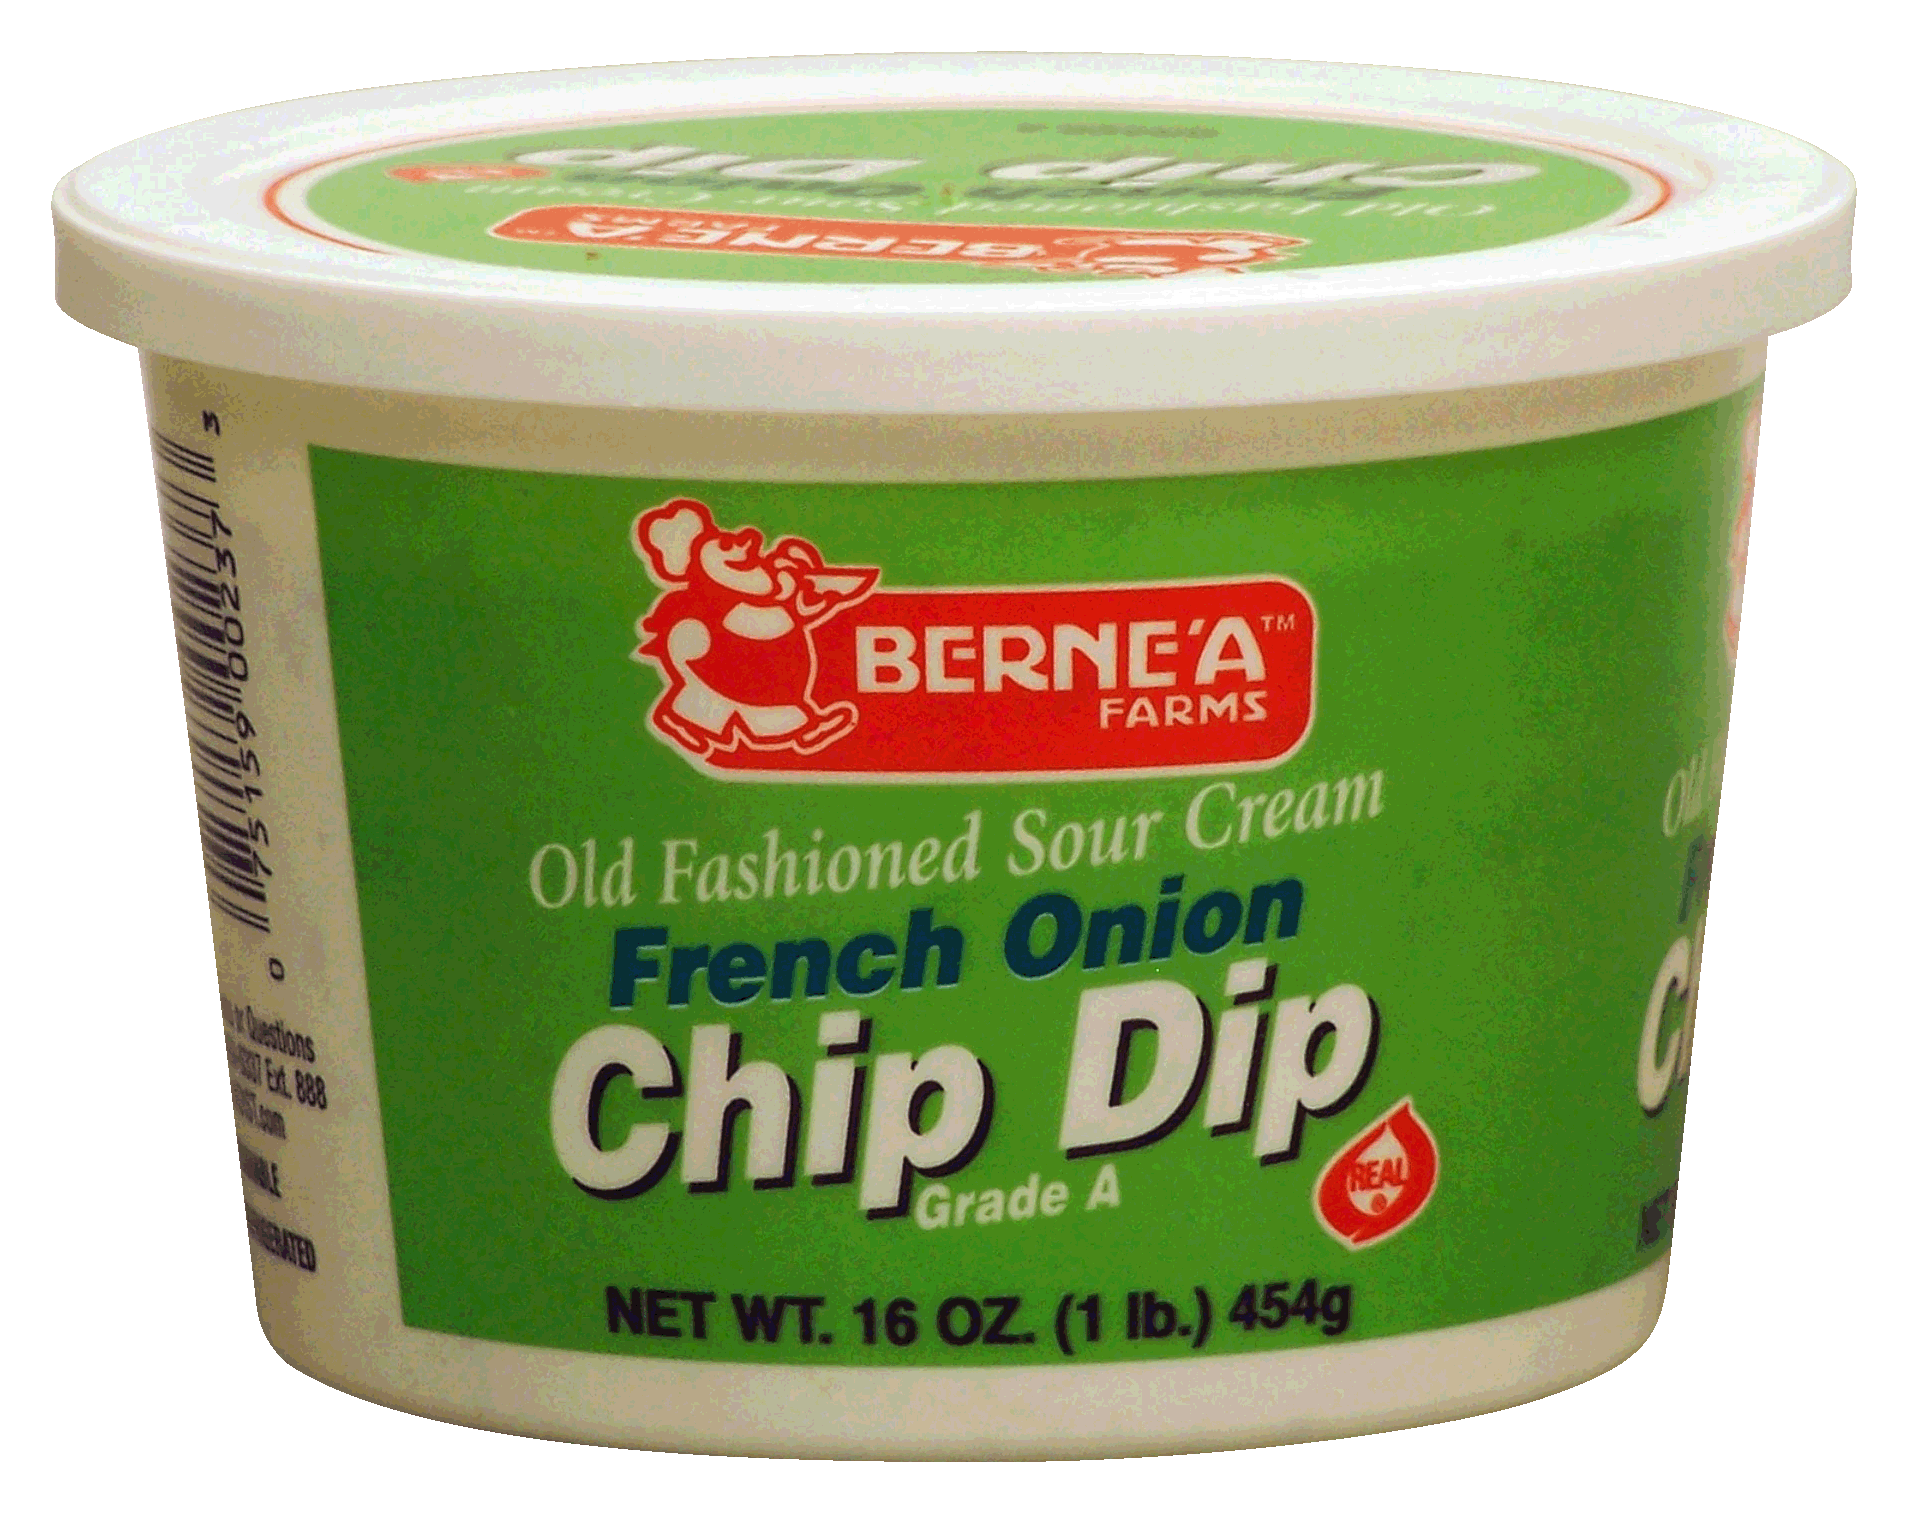 Berne'a Farms  old fashioned sour cream french onion chip dip Full-Size Picture